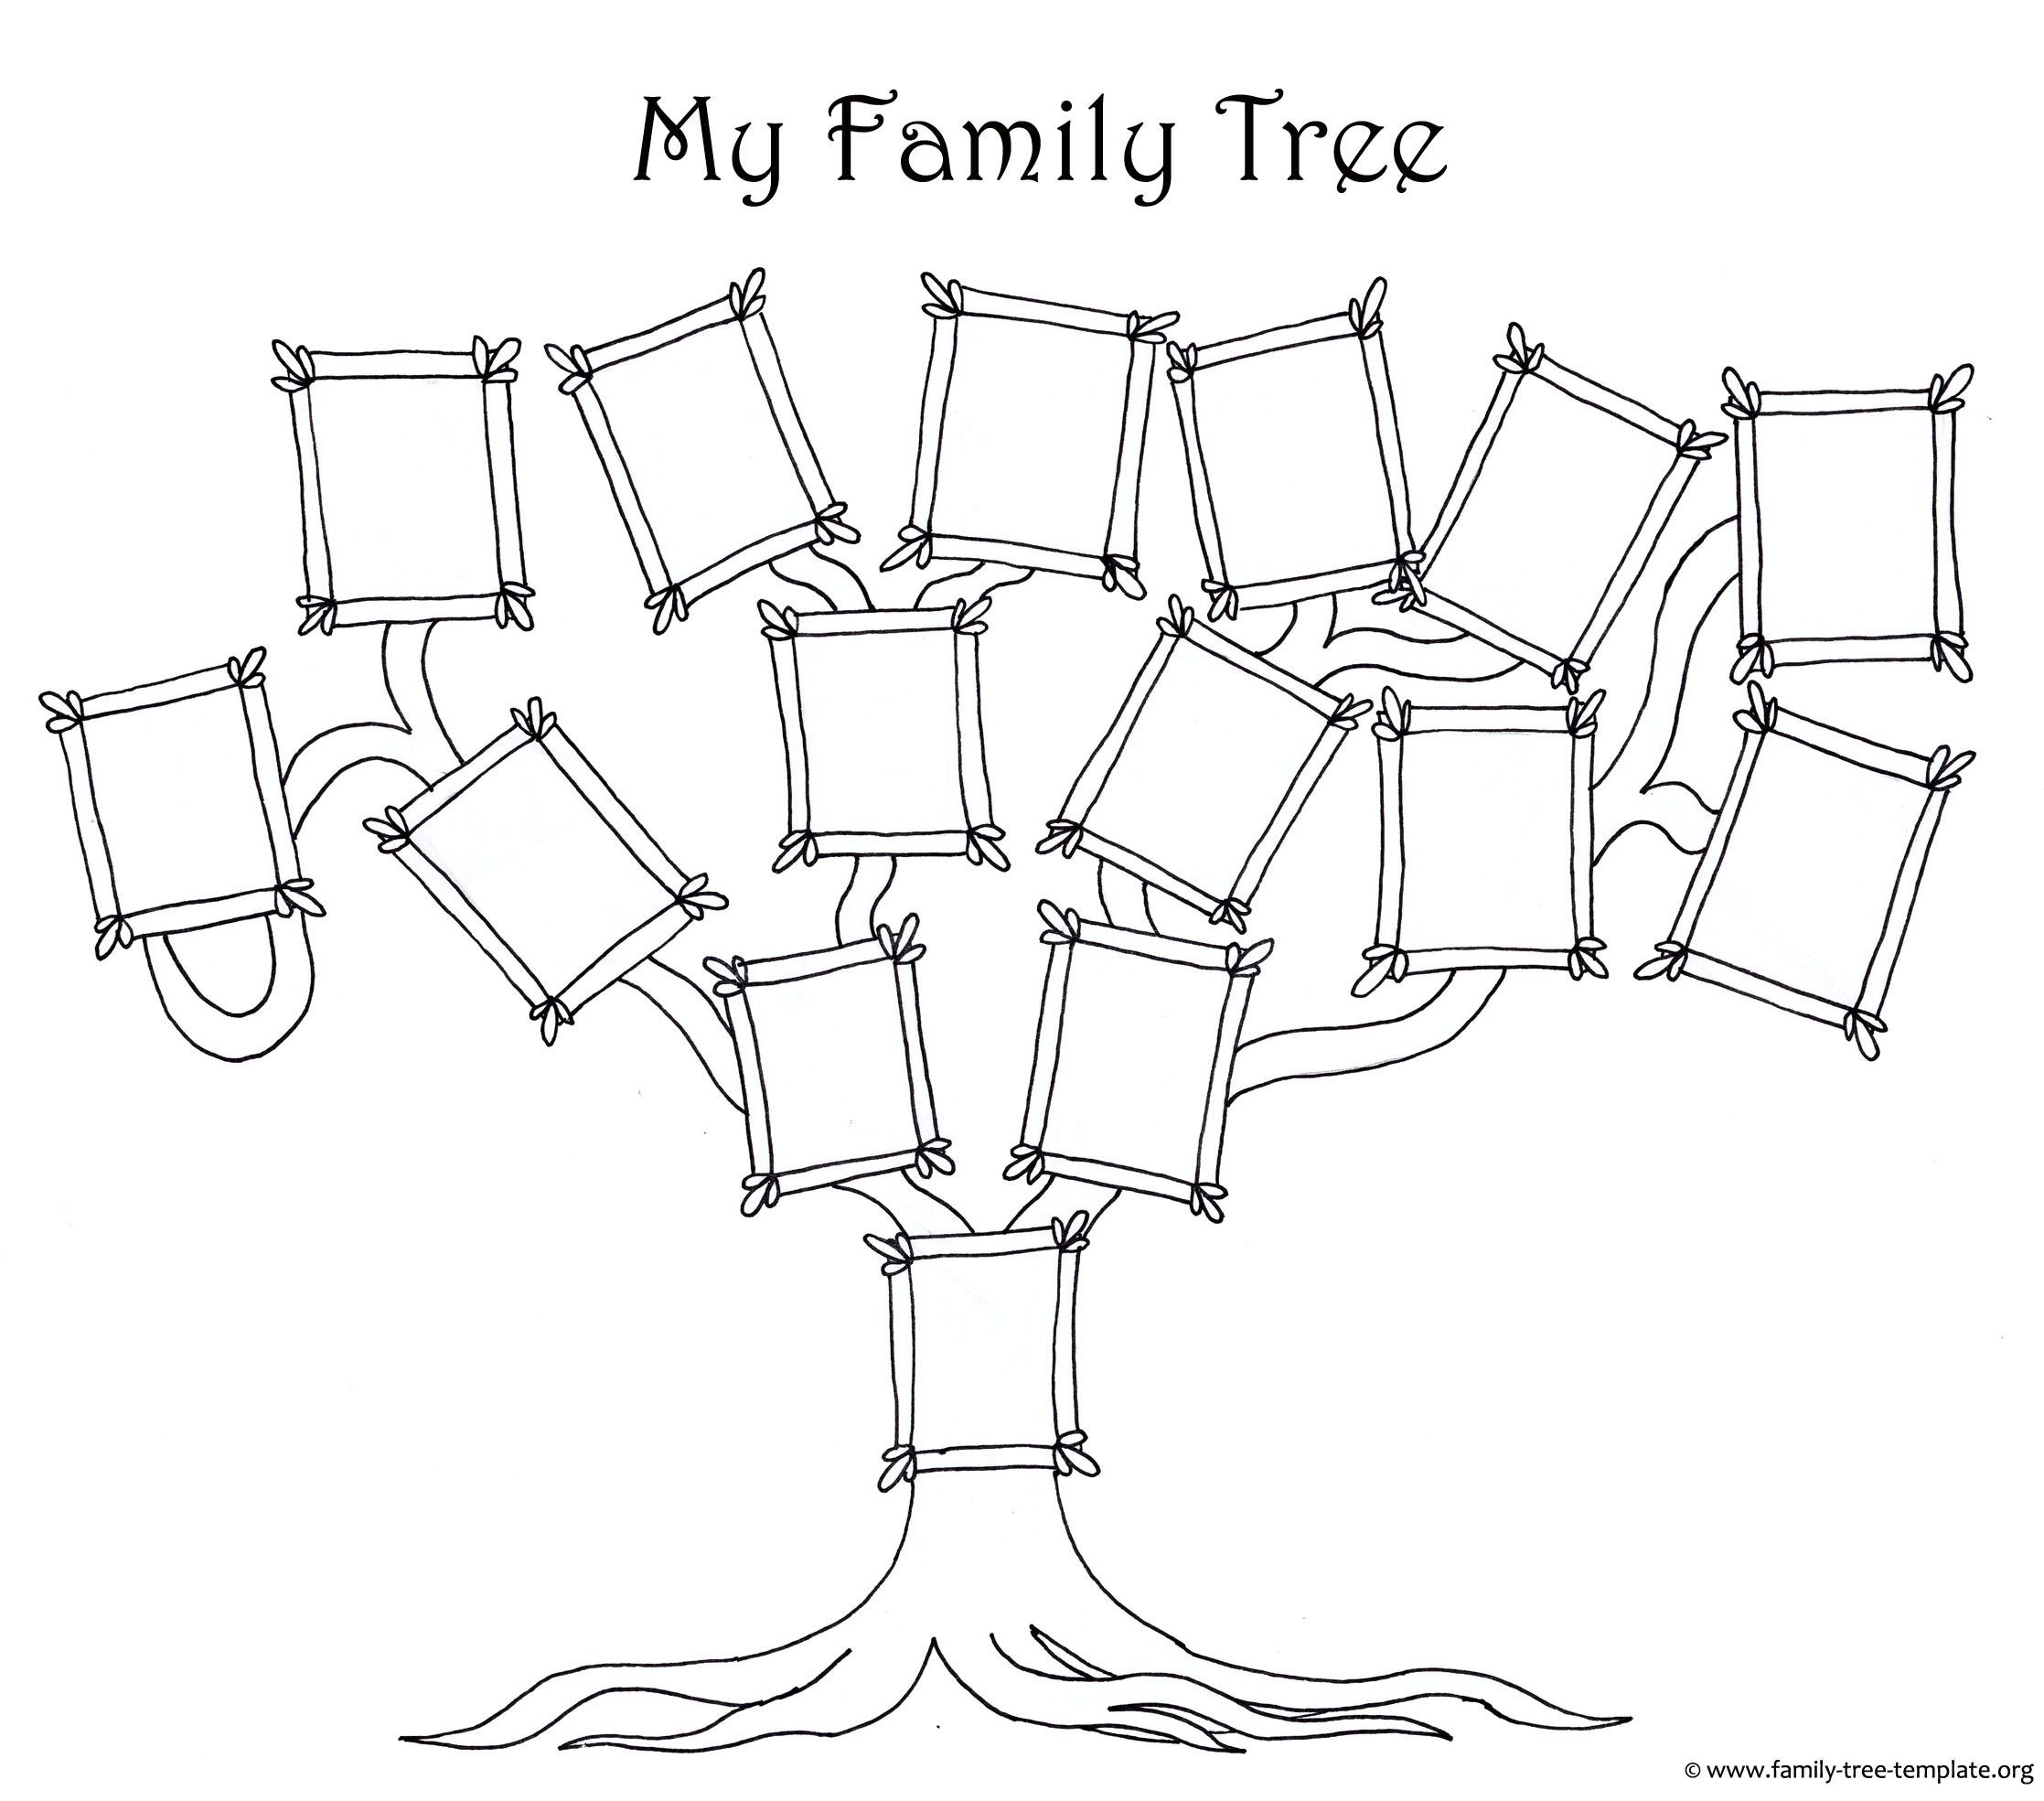 Coloring Page For Kids  A Simple Fun Family Tree Chart  Family in 3 Generation Family Tree Template Word